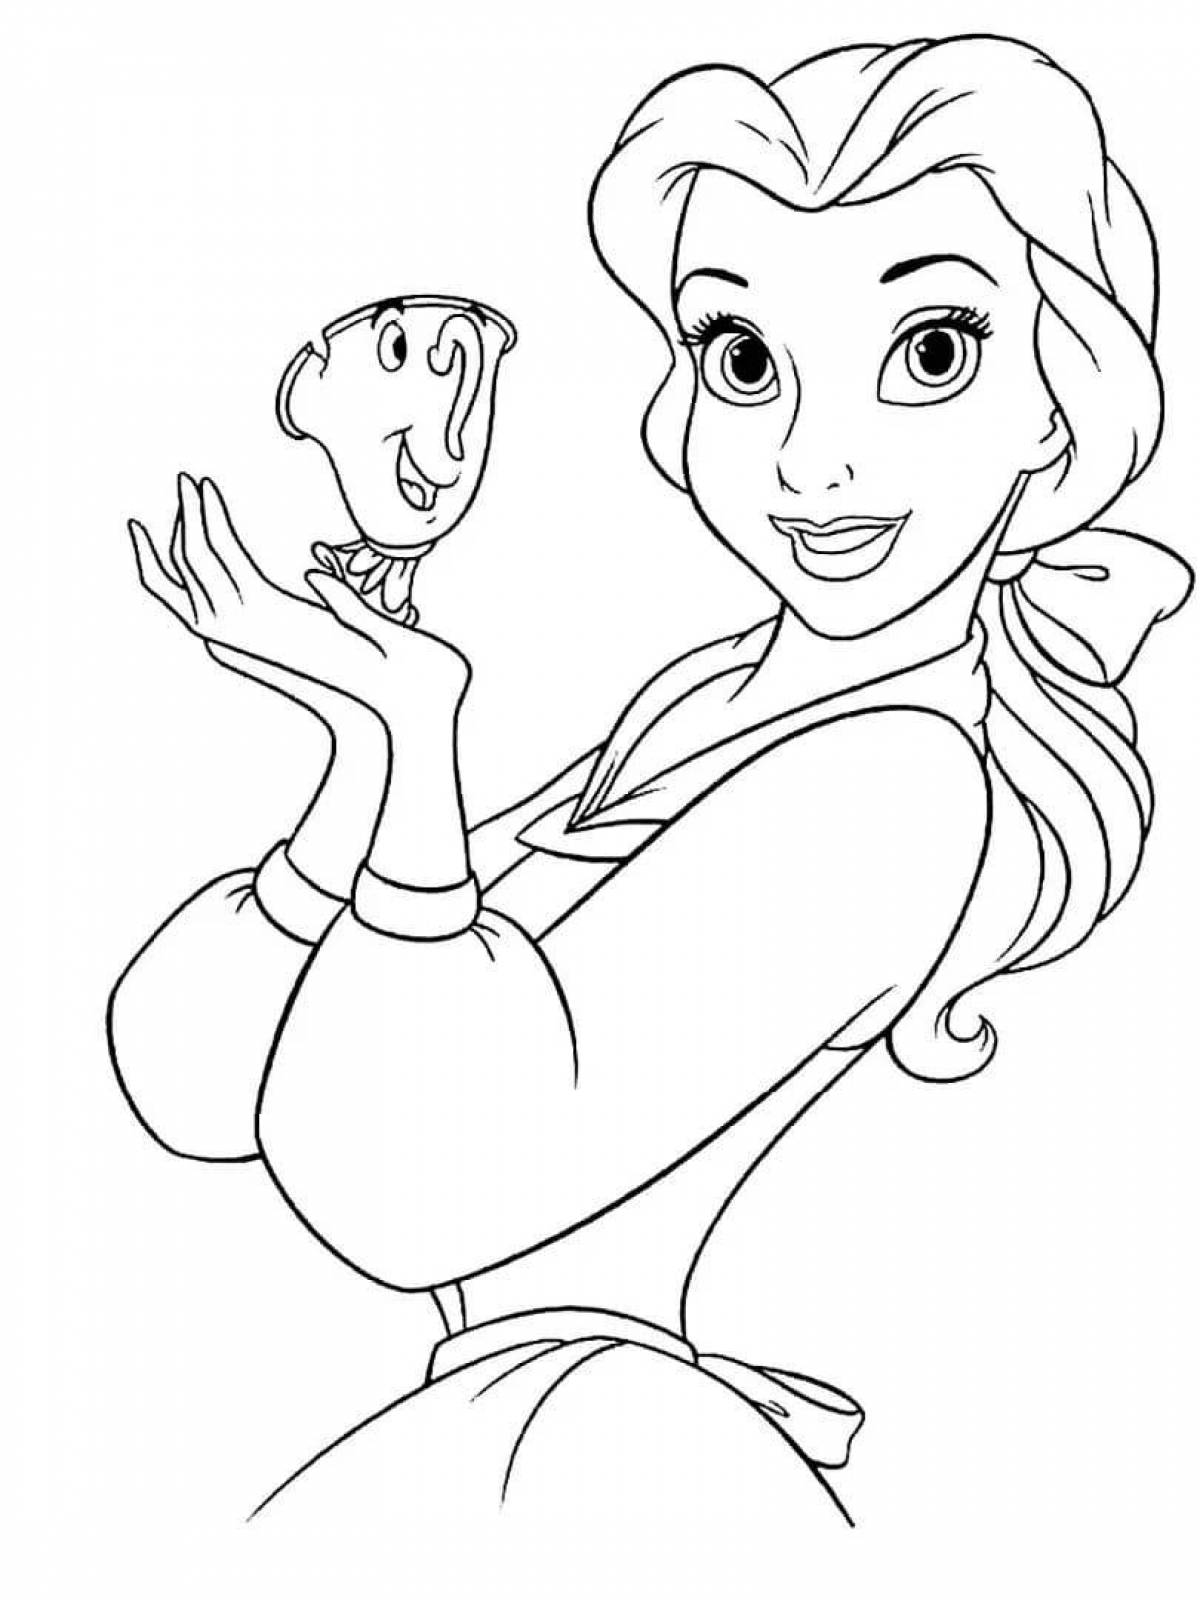 Belle's amazing coloring book